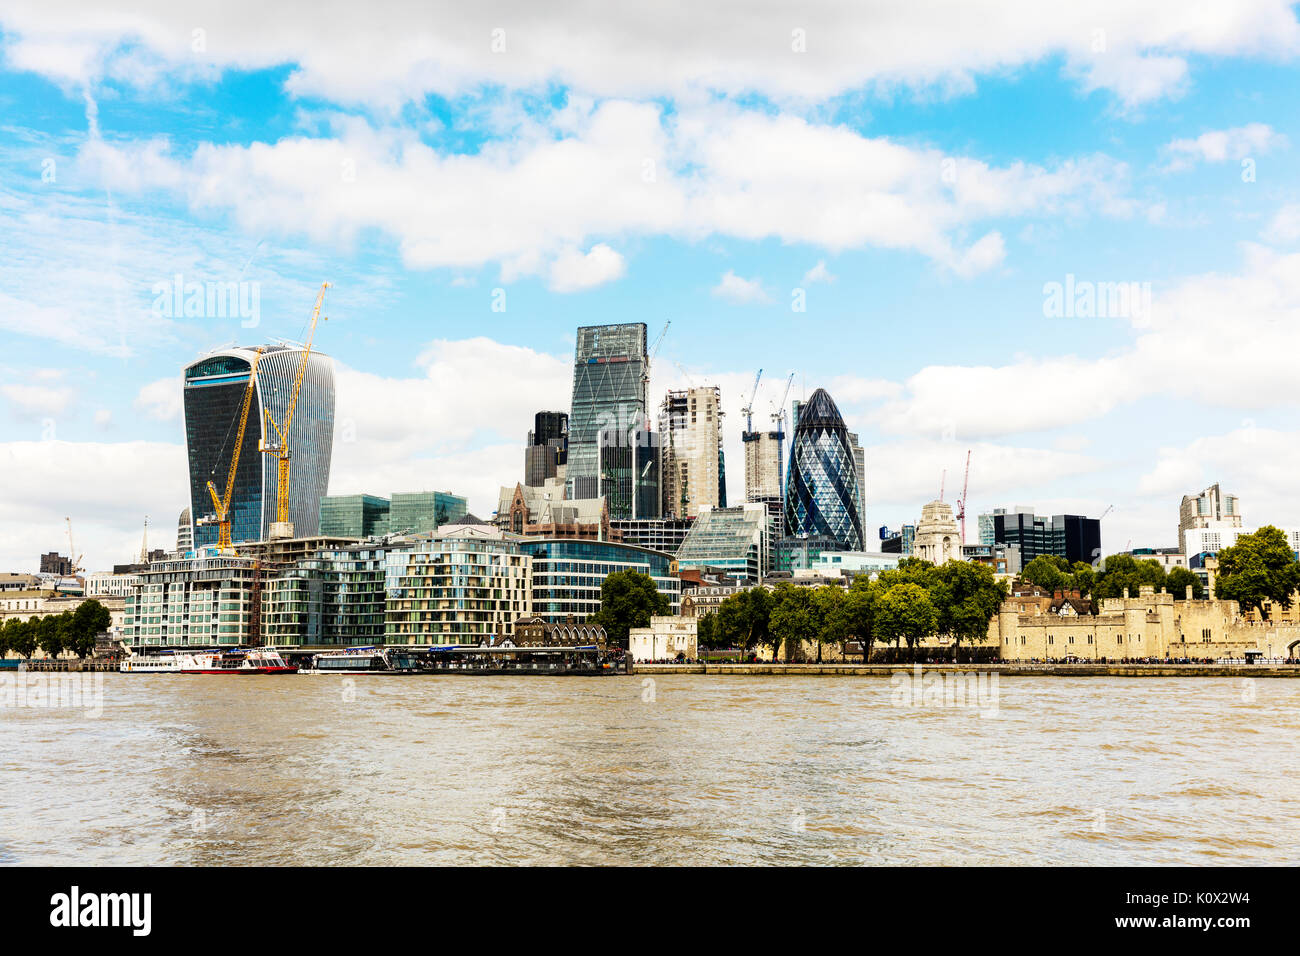 City of London skyline, Tower 42, The Cheesegrater and Walkie Talkie skyscrapers, London, England, United Kingdom, Europe, 20 fenchurch street, cities Stock Photo